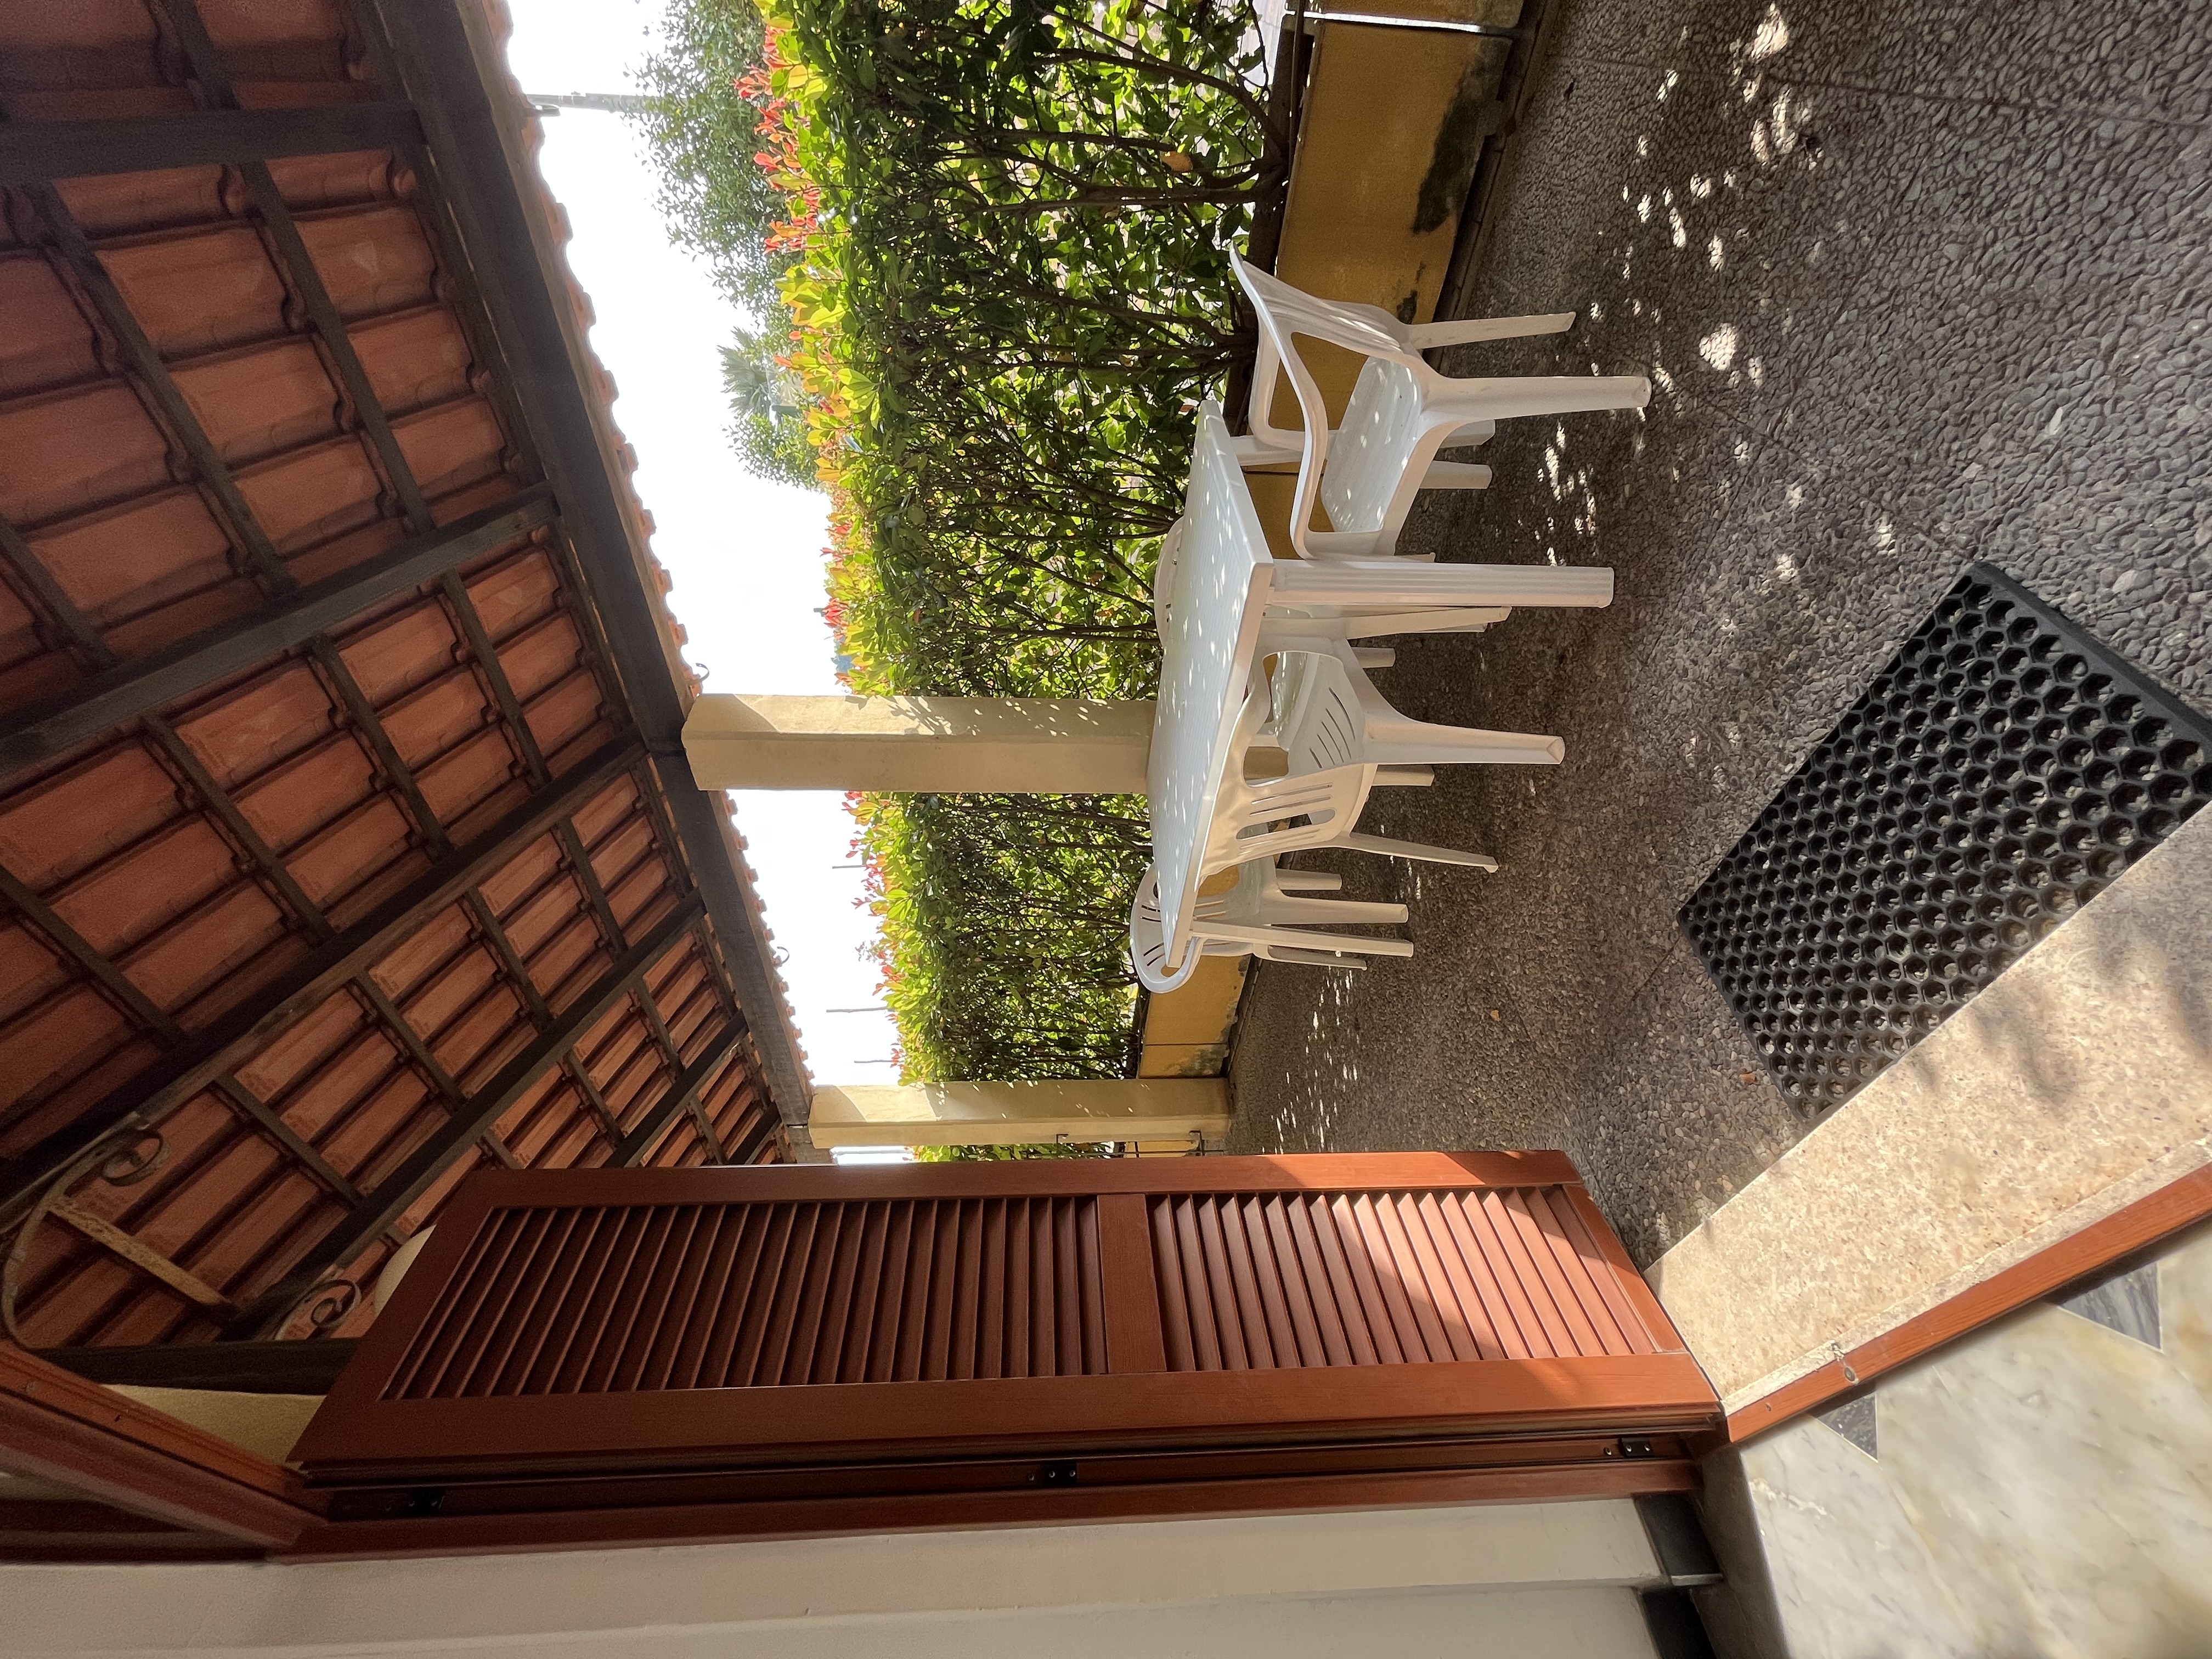 Location - Residence (Two Rooms) - Camping Pian dei Boschi